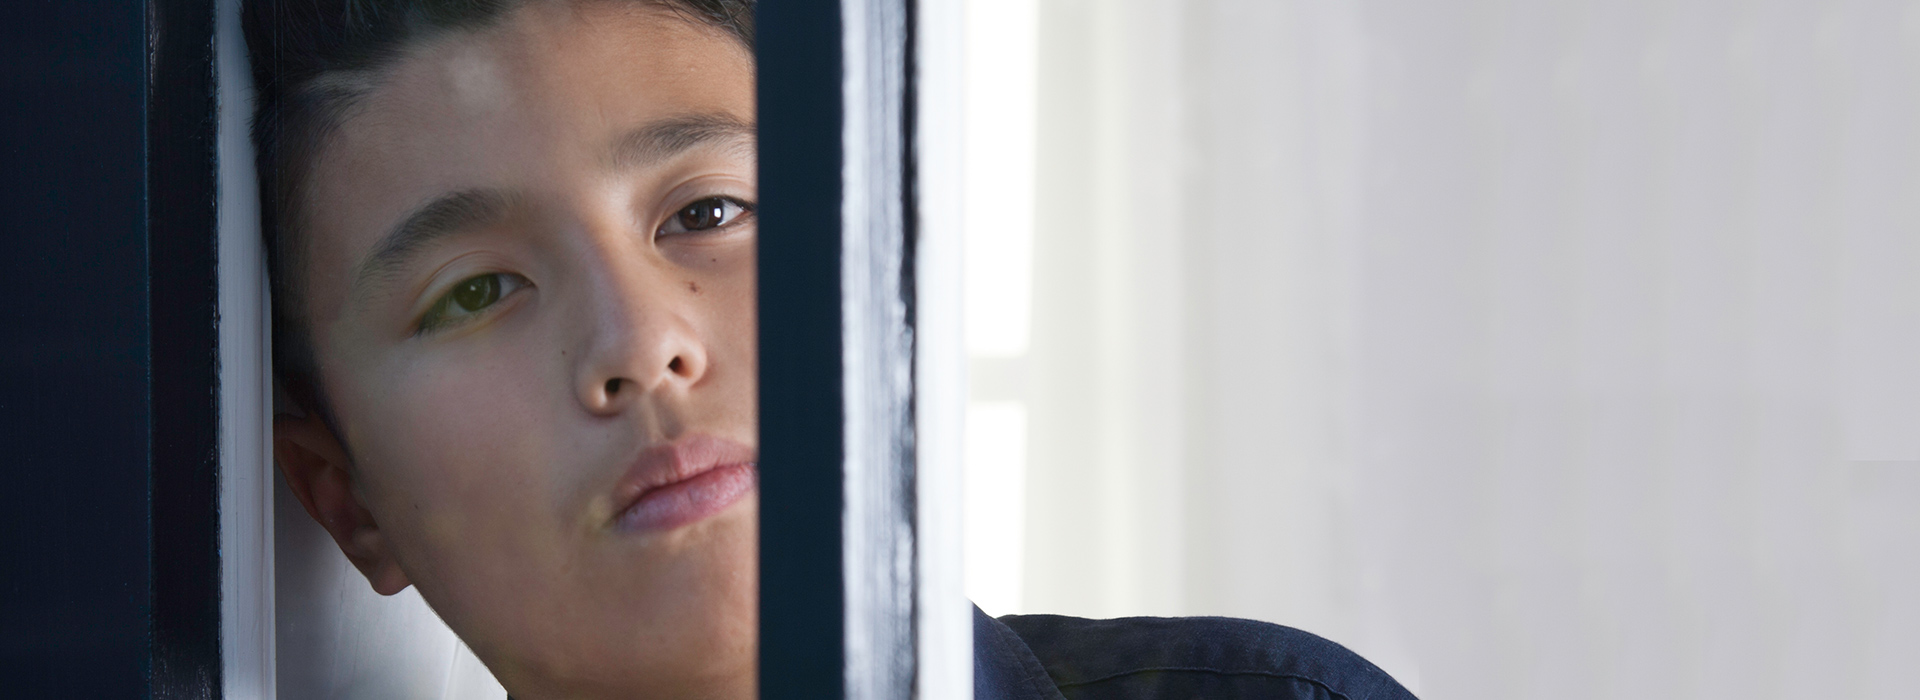 Boy leaning against window staring into distance thoughtful